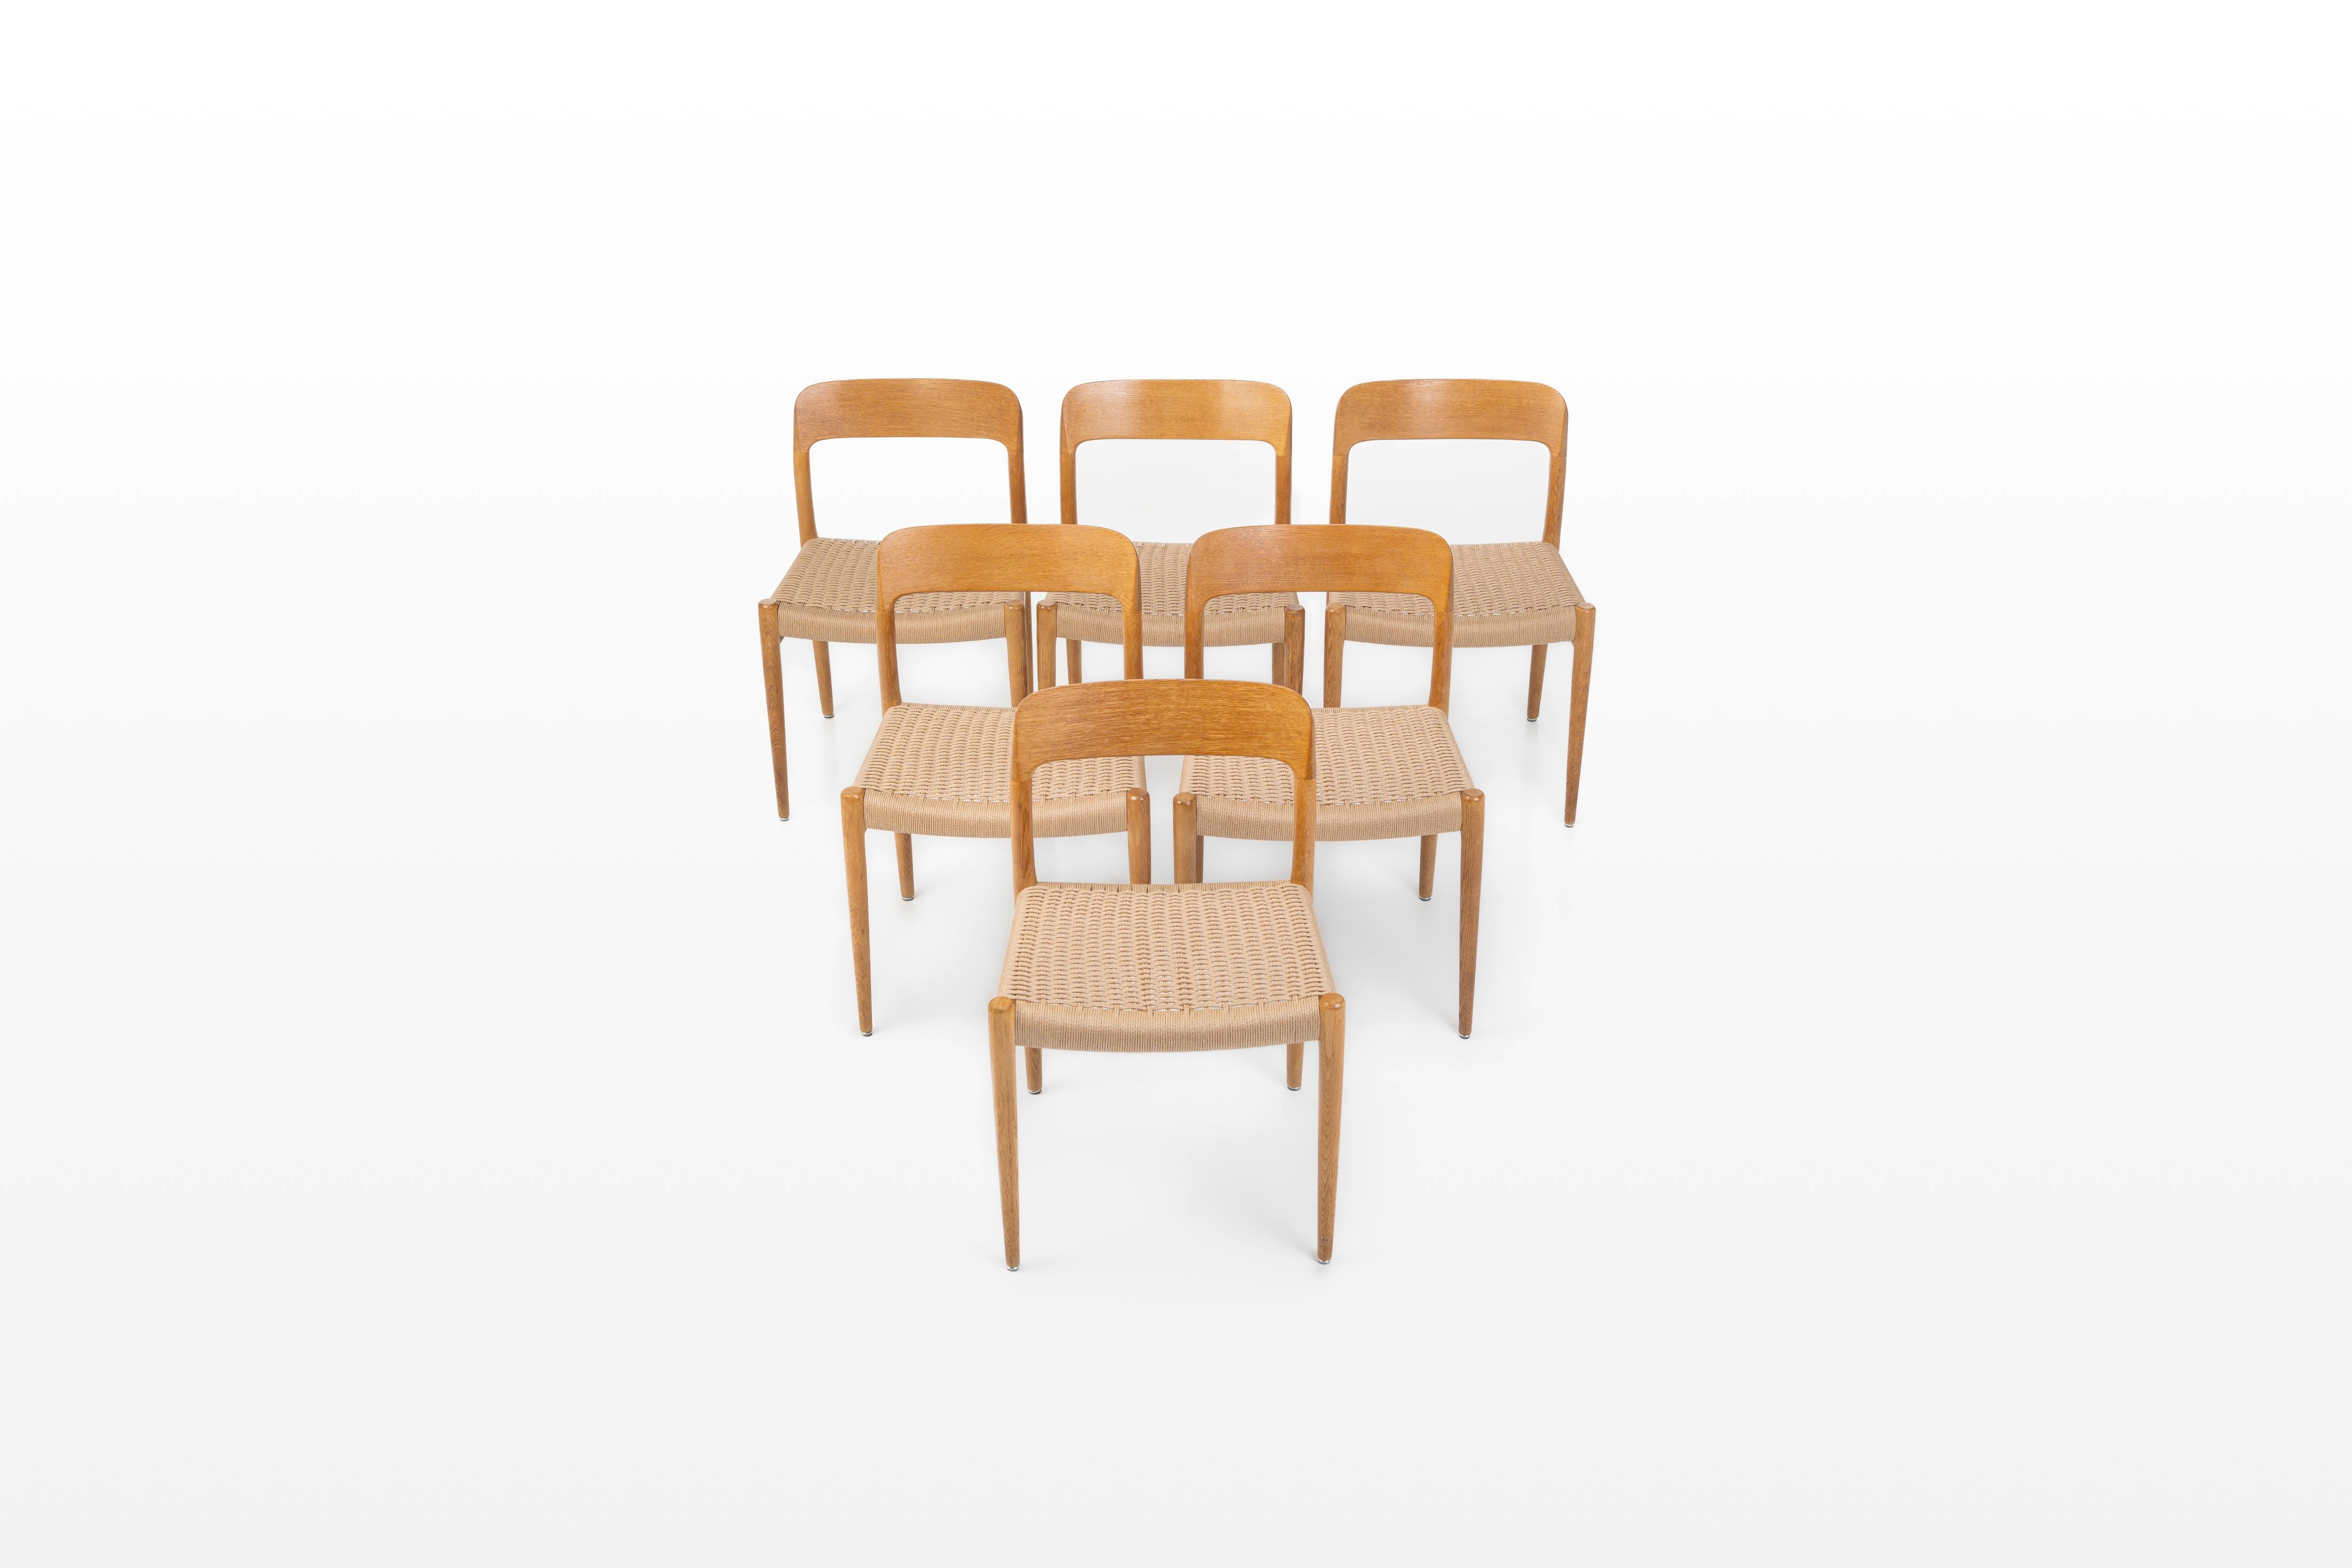 Set of six 'Model 75' dining chairs designed by Niels Otto Møller for J.L. Møllers Møbelfabrik, Denmark 1960s. The chairs have an oak frame and a papercord seating. The chairs are marked by the producer and are in very good